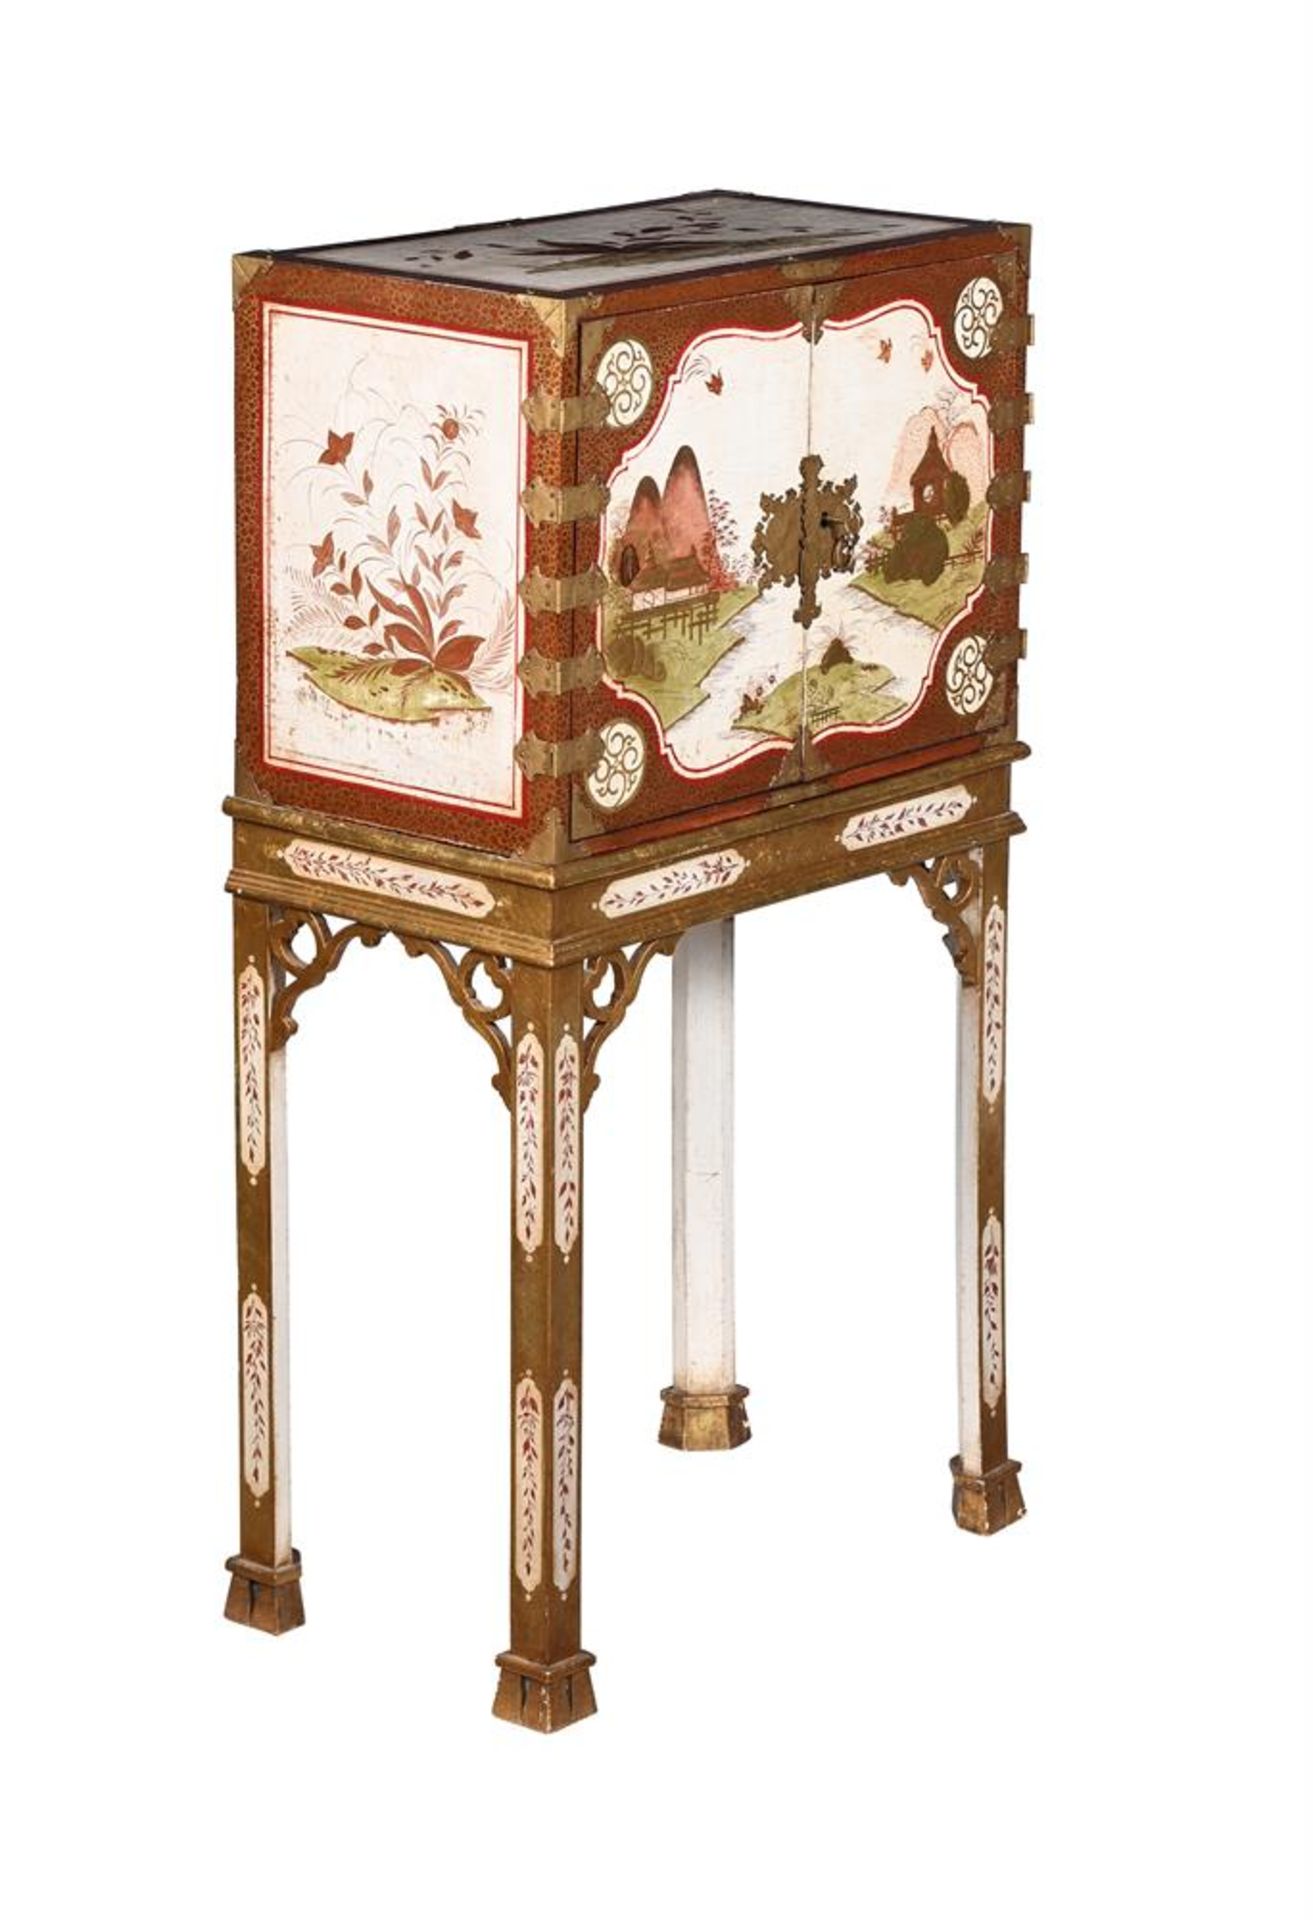 A CHINESE EXPORT LACQUER AND POLYCHROME DECORATED CABINET ON STAND, 19TH OR 20TH CENTURY